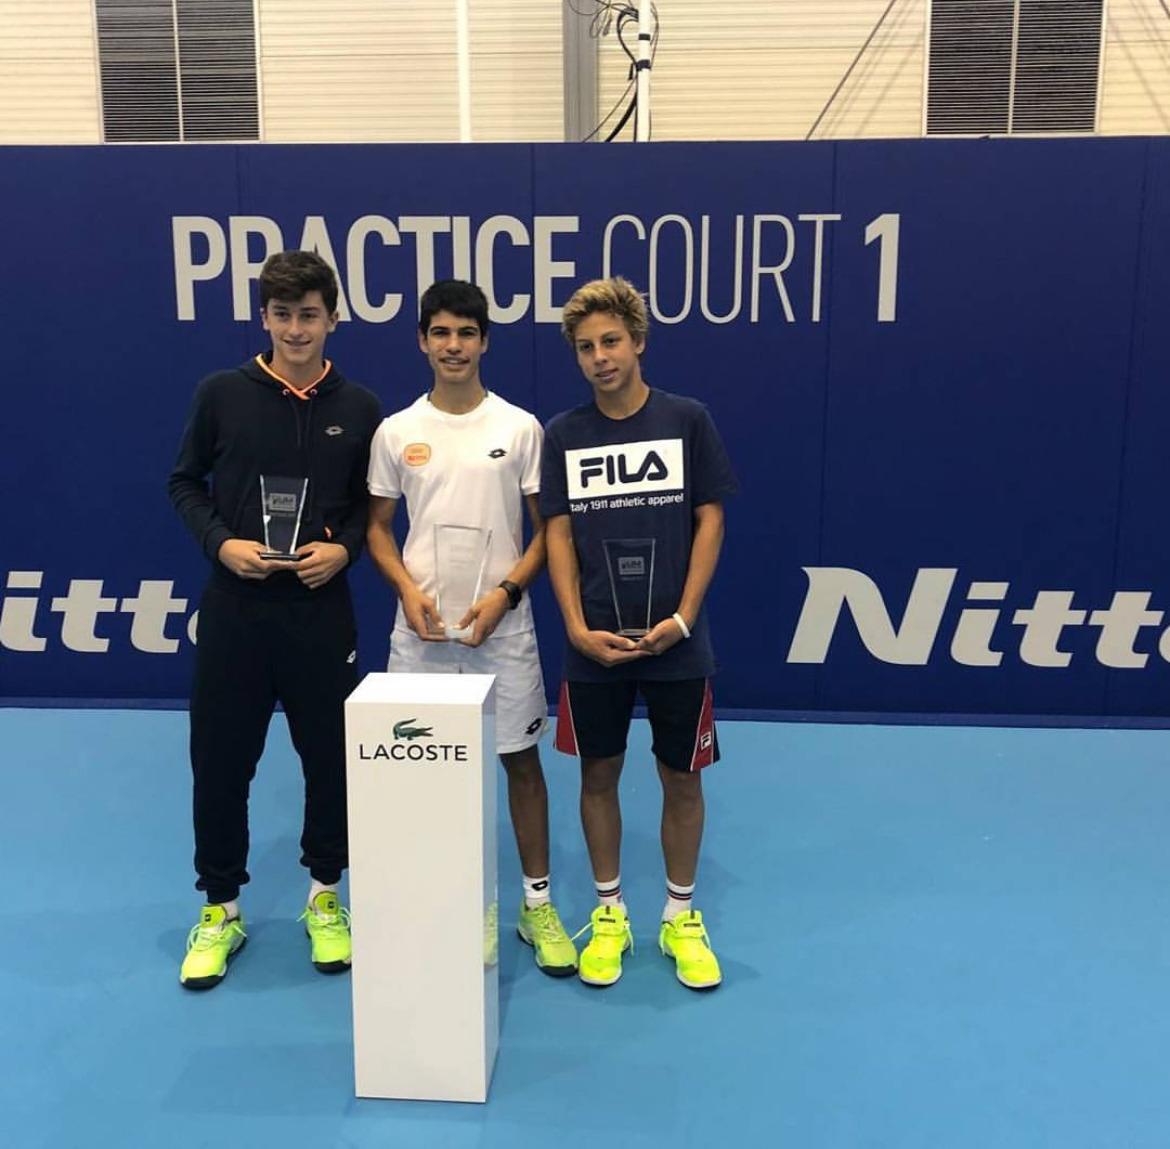 Former junior World No. 17 Luca Nardi (left) has claimed his first Top 10 win and biggest of his career after defeating Novak Djokovic 6-4, 3-6, 6-3 @BNPPARIBASOPEN 🤝 Carlos Alcaraz, Luca Nardi & Pedro Boscardin in 2017 at juniors invitational event during the ATP Finals